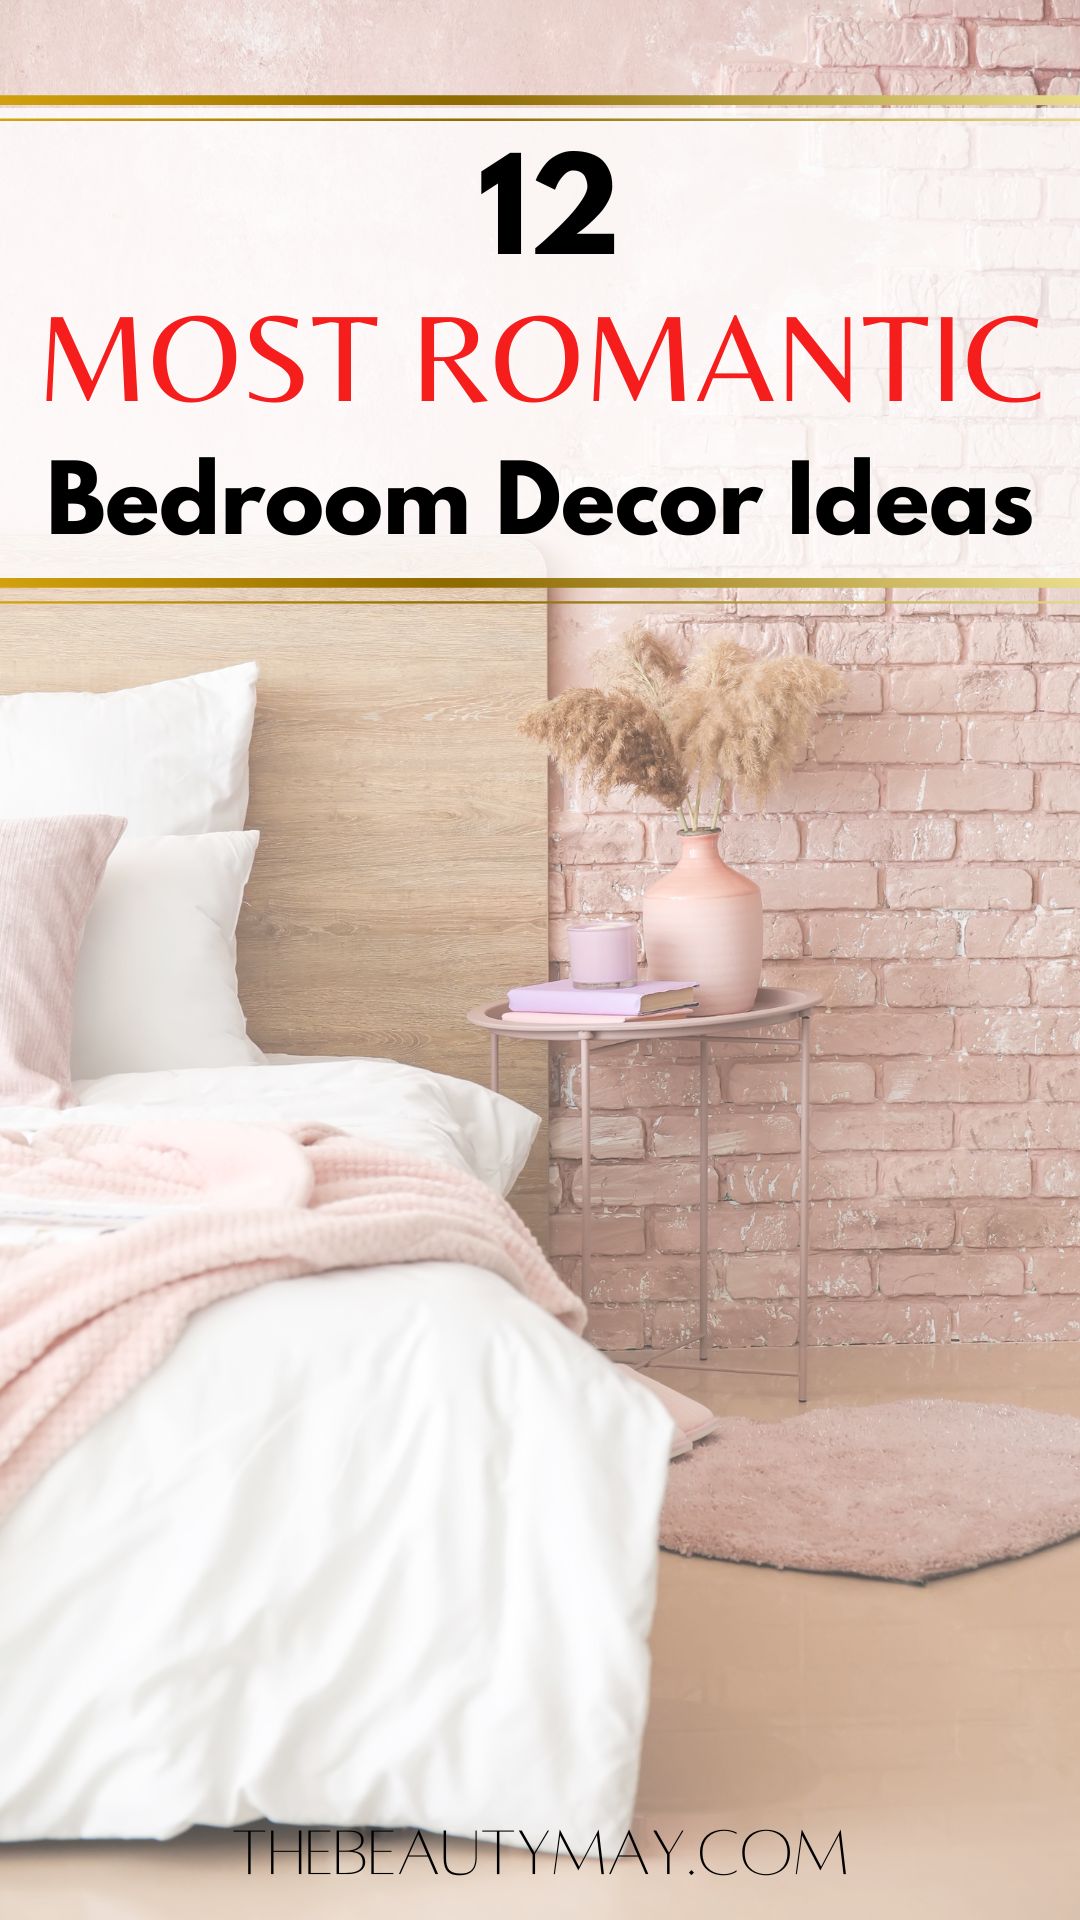 How to make your bedroom romantic